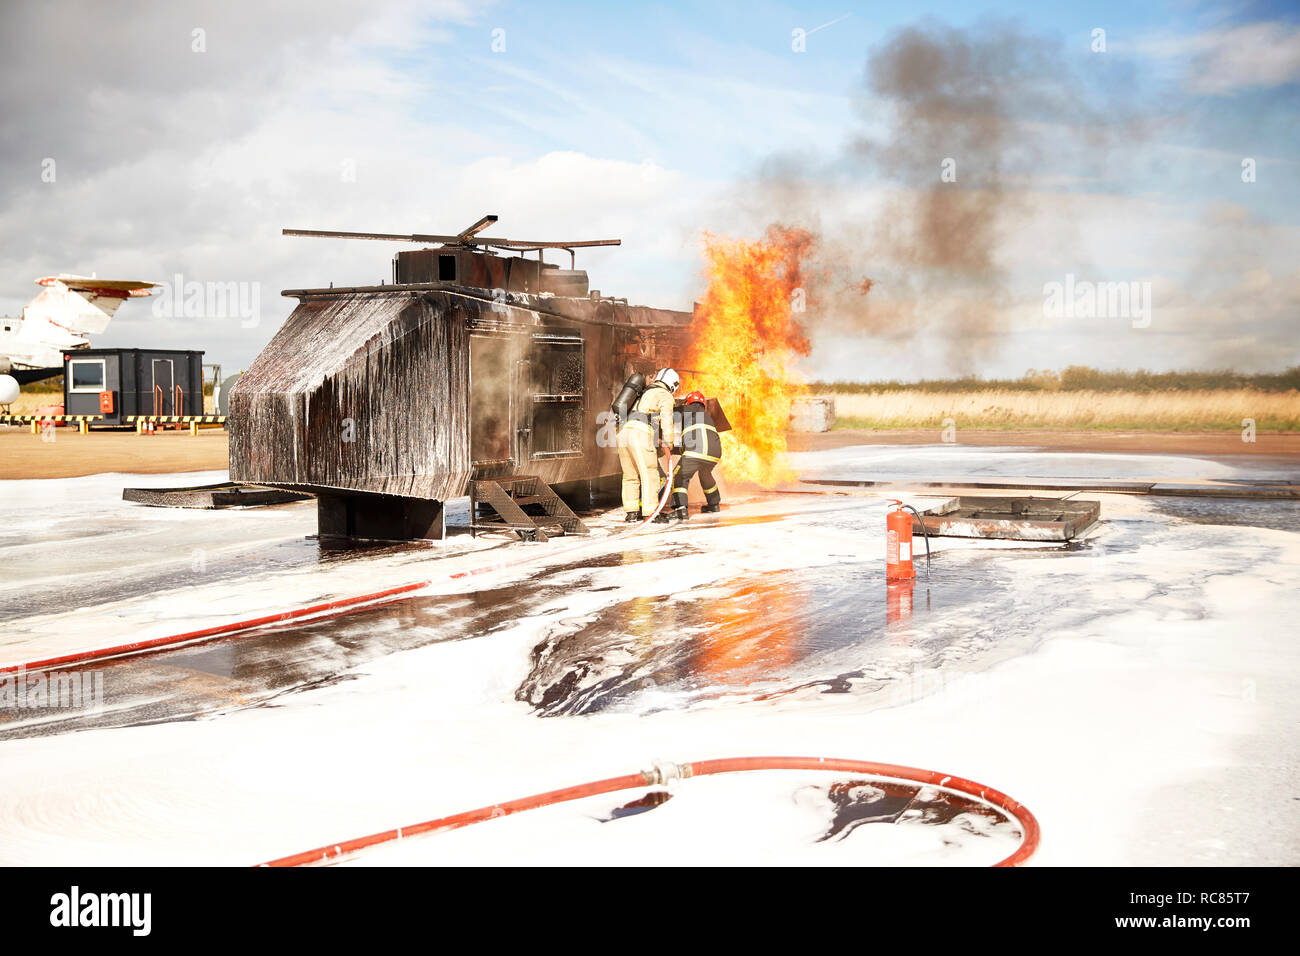 Firemen training, team of firemen spraying firefighting foam at mock helicopter fire at training facility Stock Photo